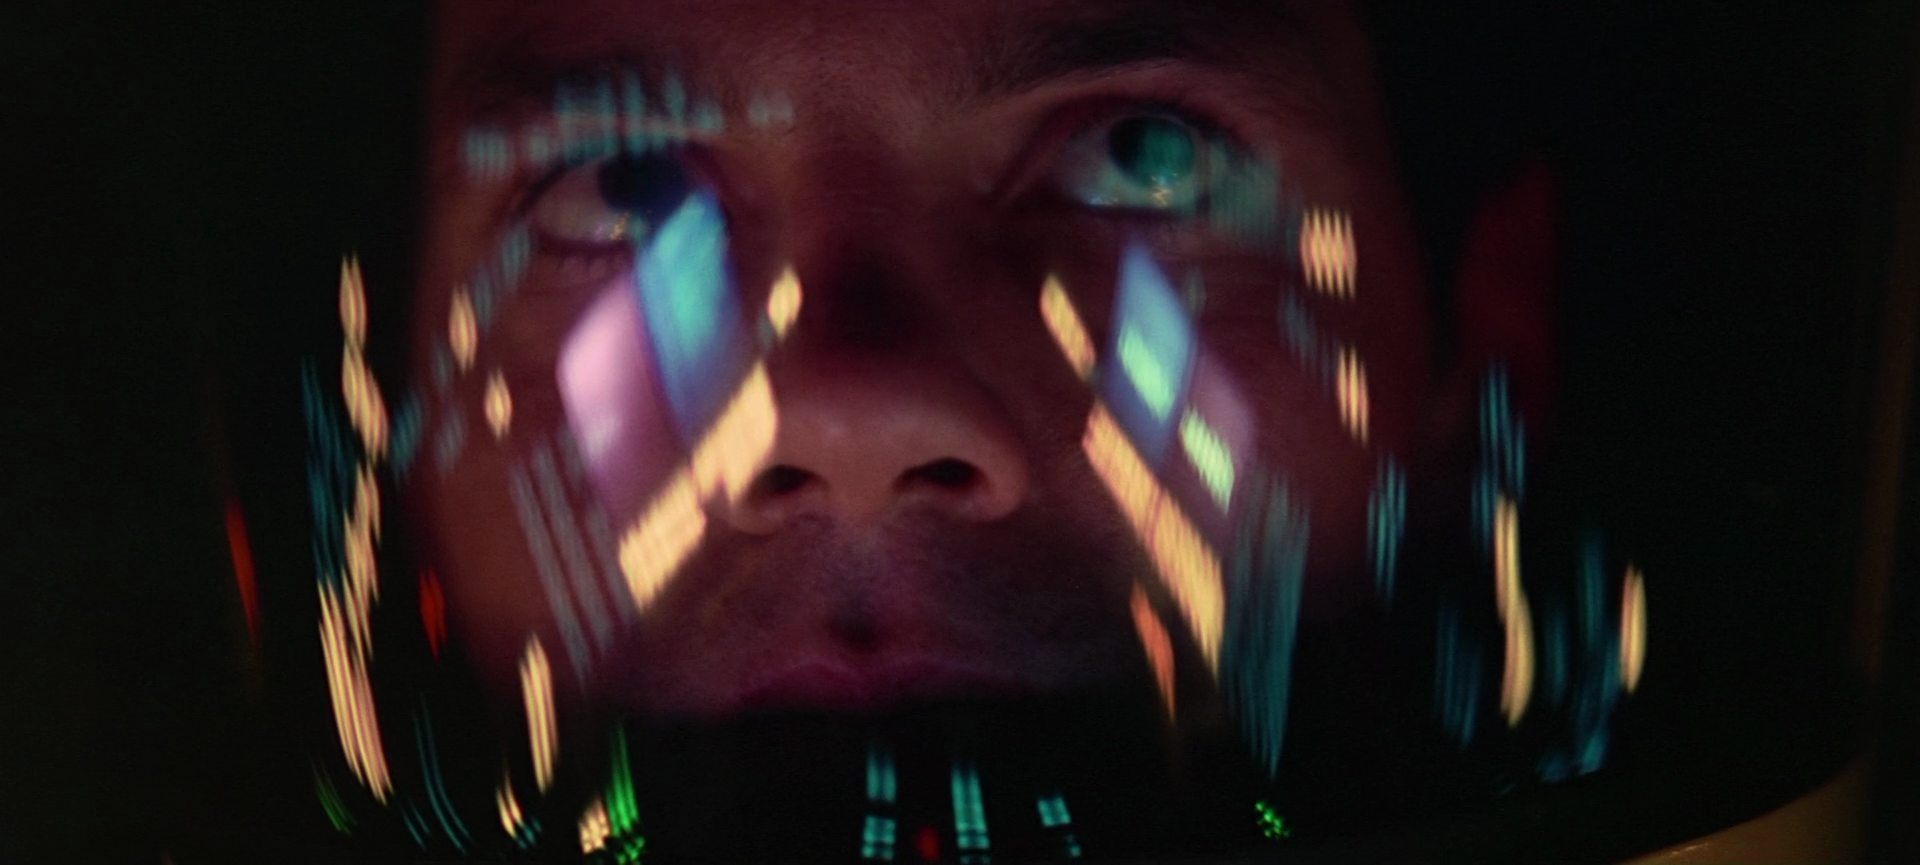 A Space Odyssey Wallpaper And Background Image - 2001 A Space Odyssey , HD Wallpaper & Backgrounds